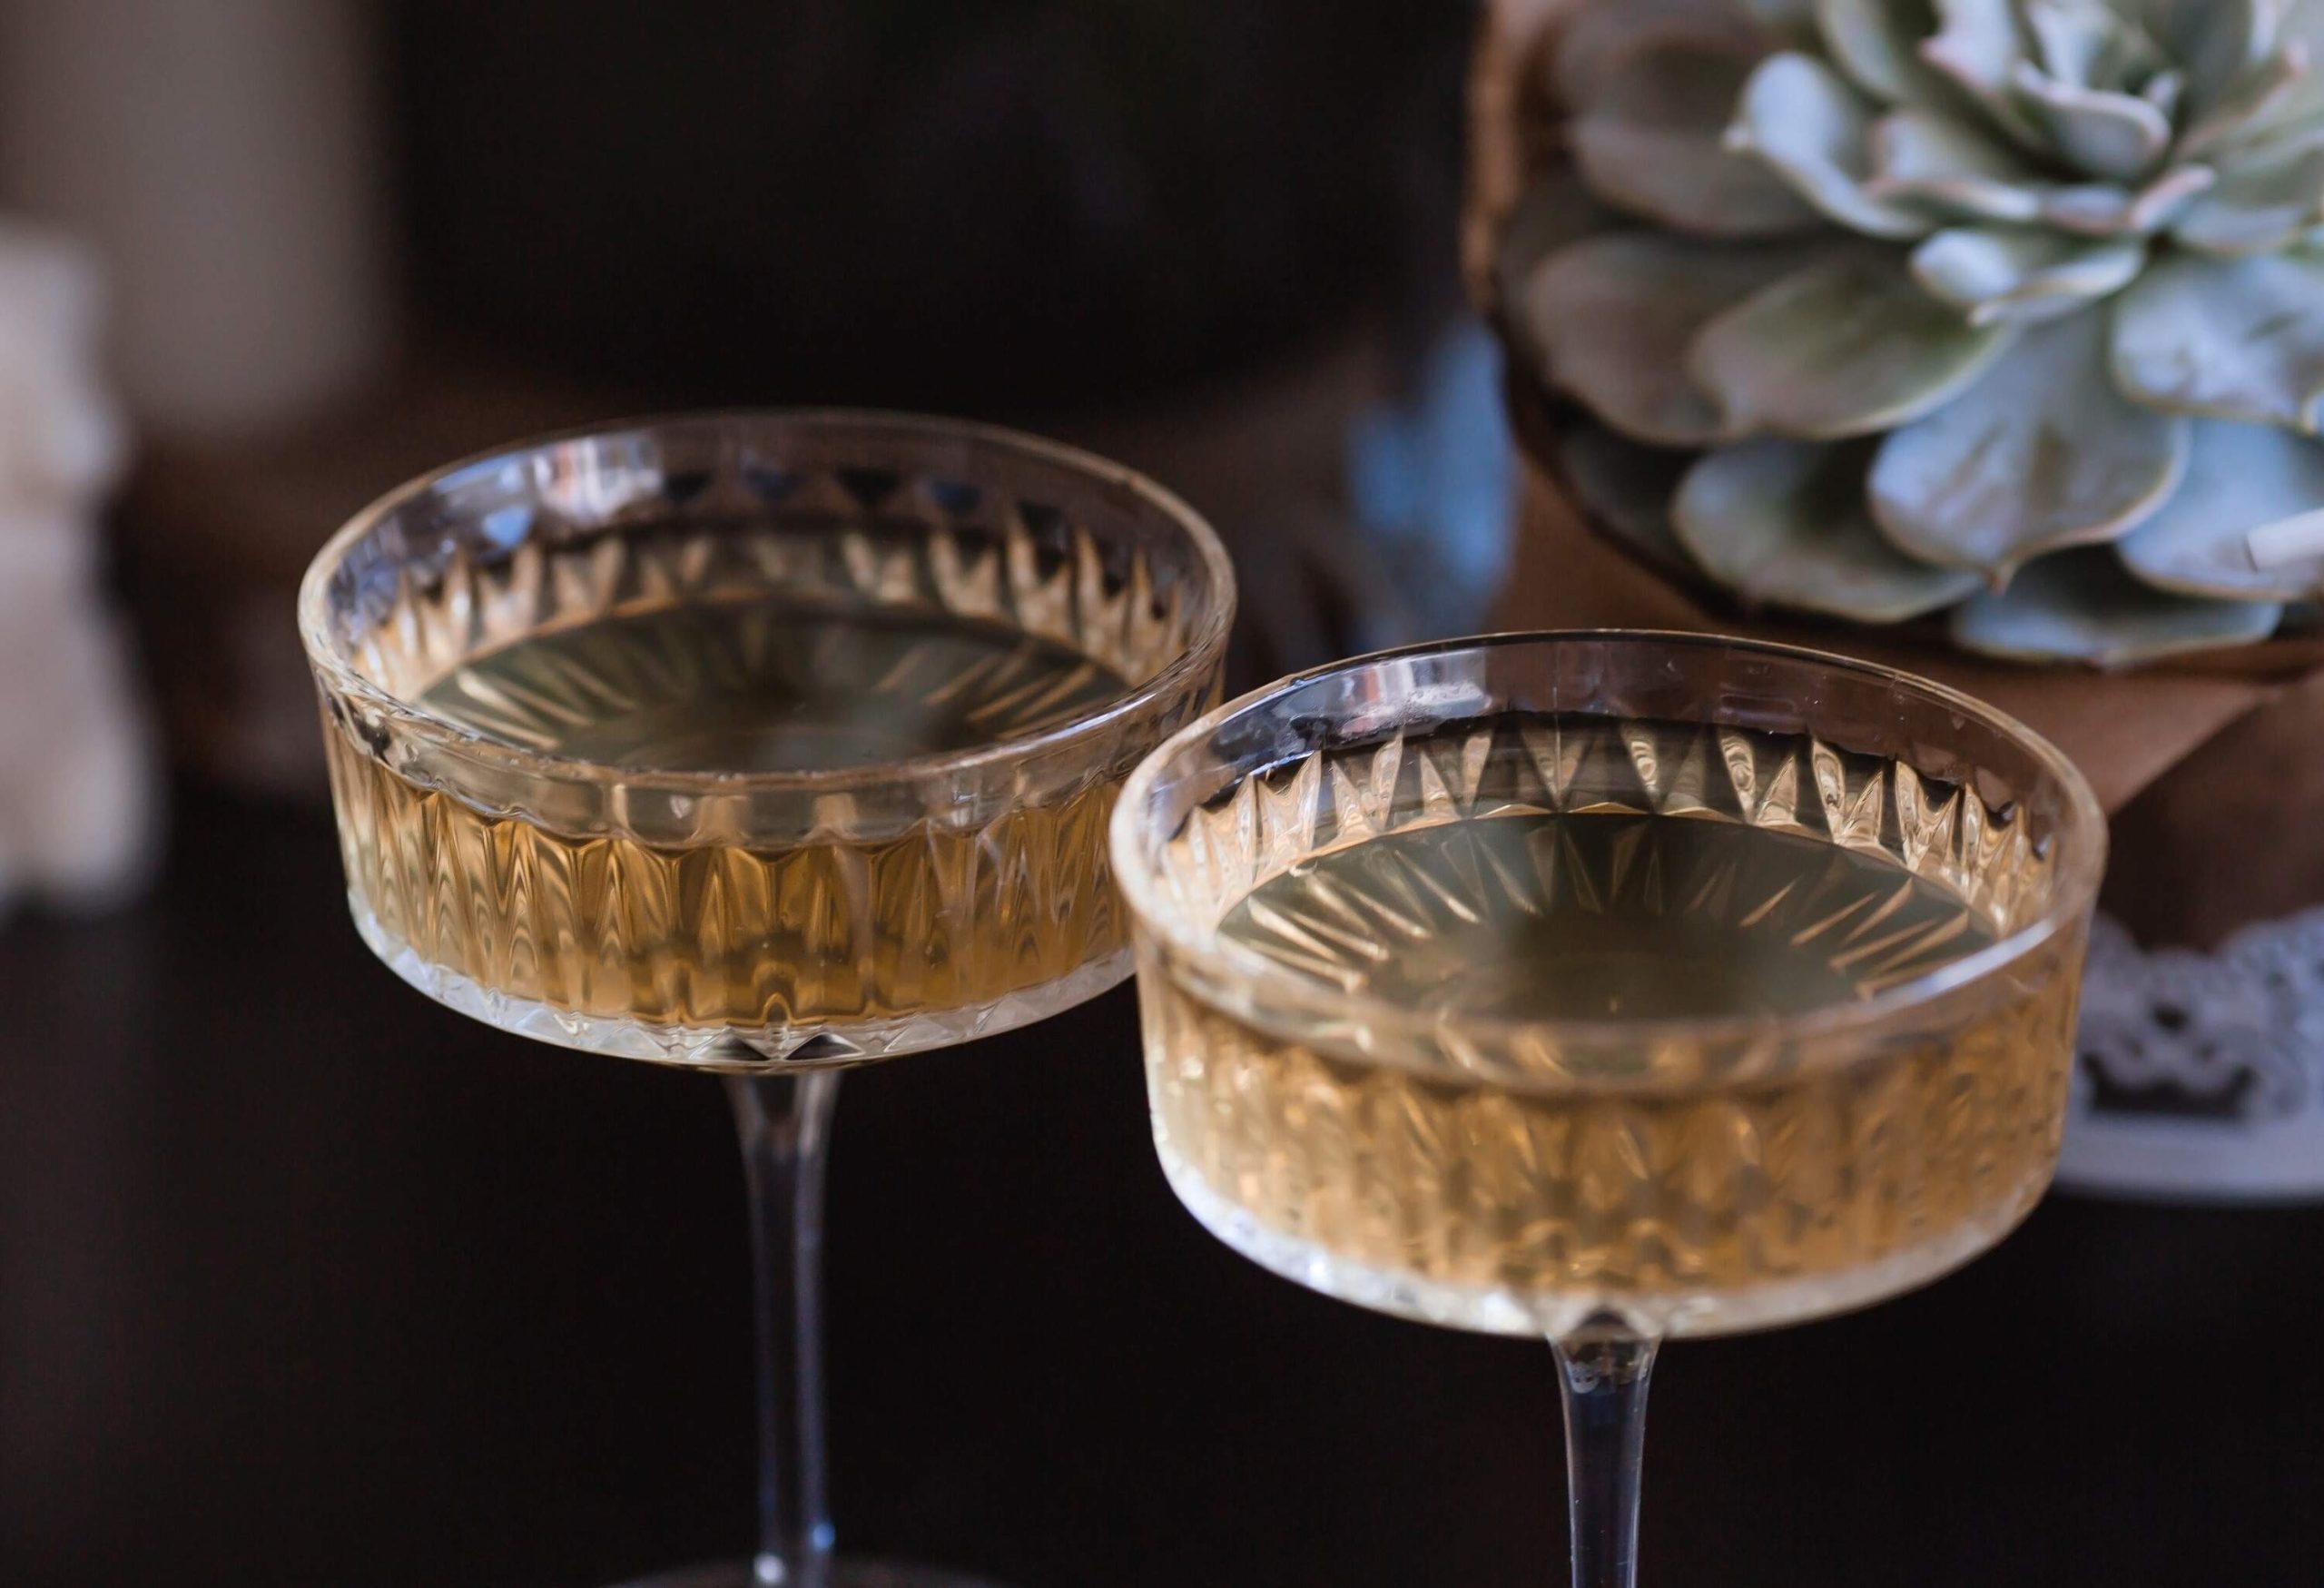 A pair of champagne glasses sitting on a table next to a beautiful centerpiece.